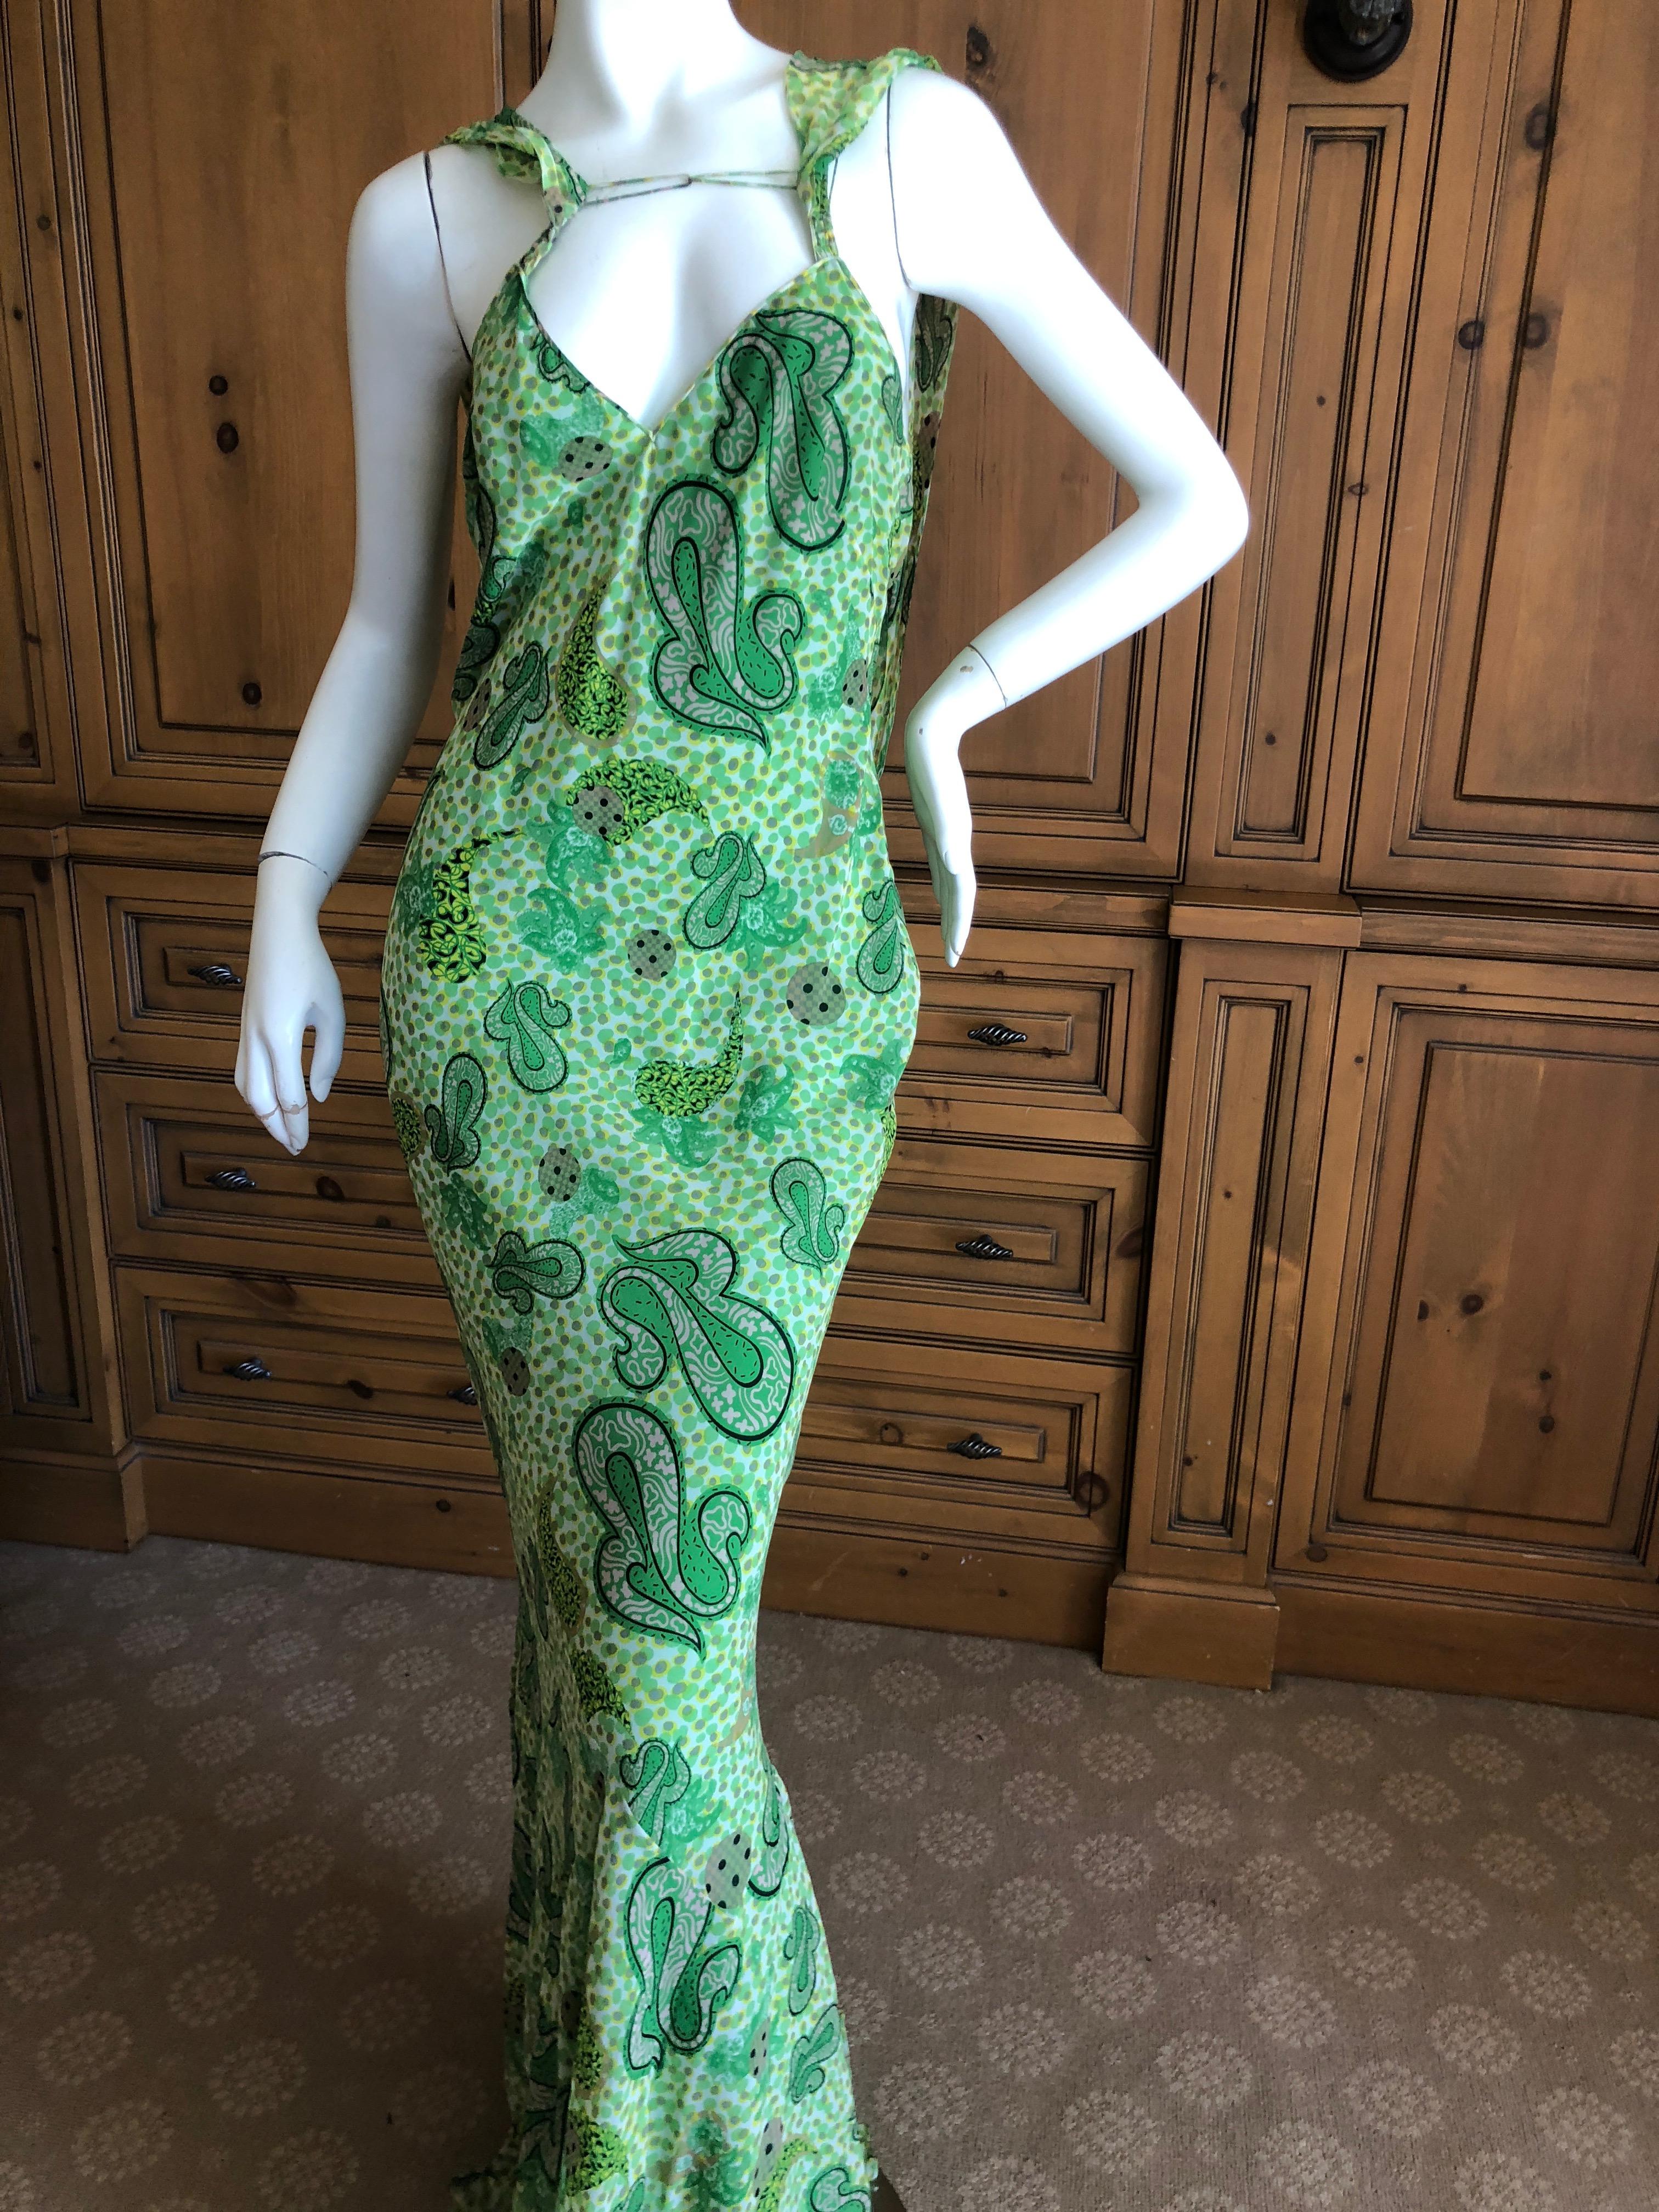  John Galliano 2002 Green Silk Paisley Ruffled Evening Dress with Low Cowl Back In Excellent Condition For Sale In Cloverdale, CA